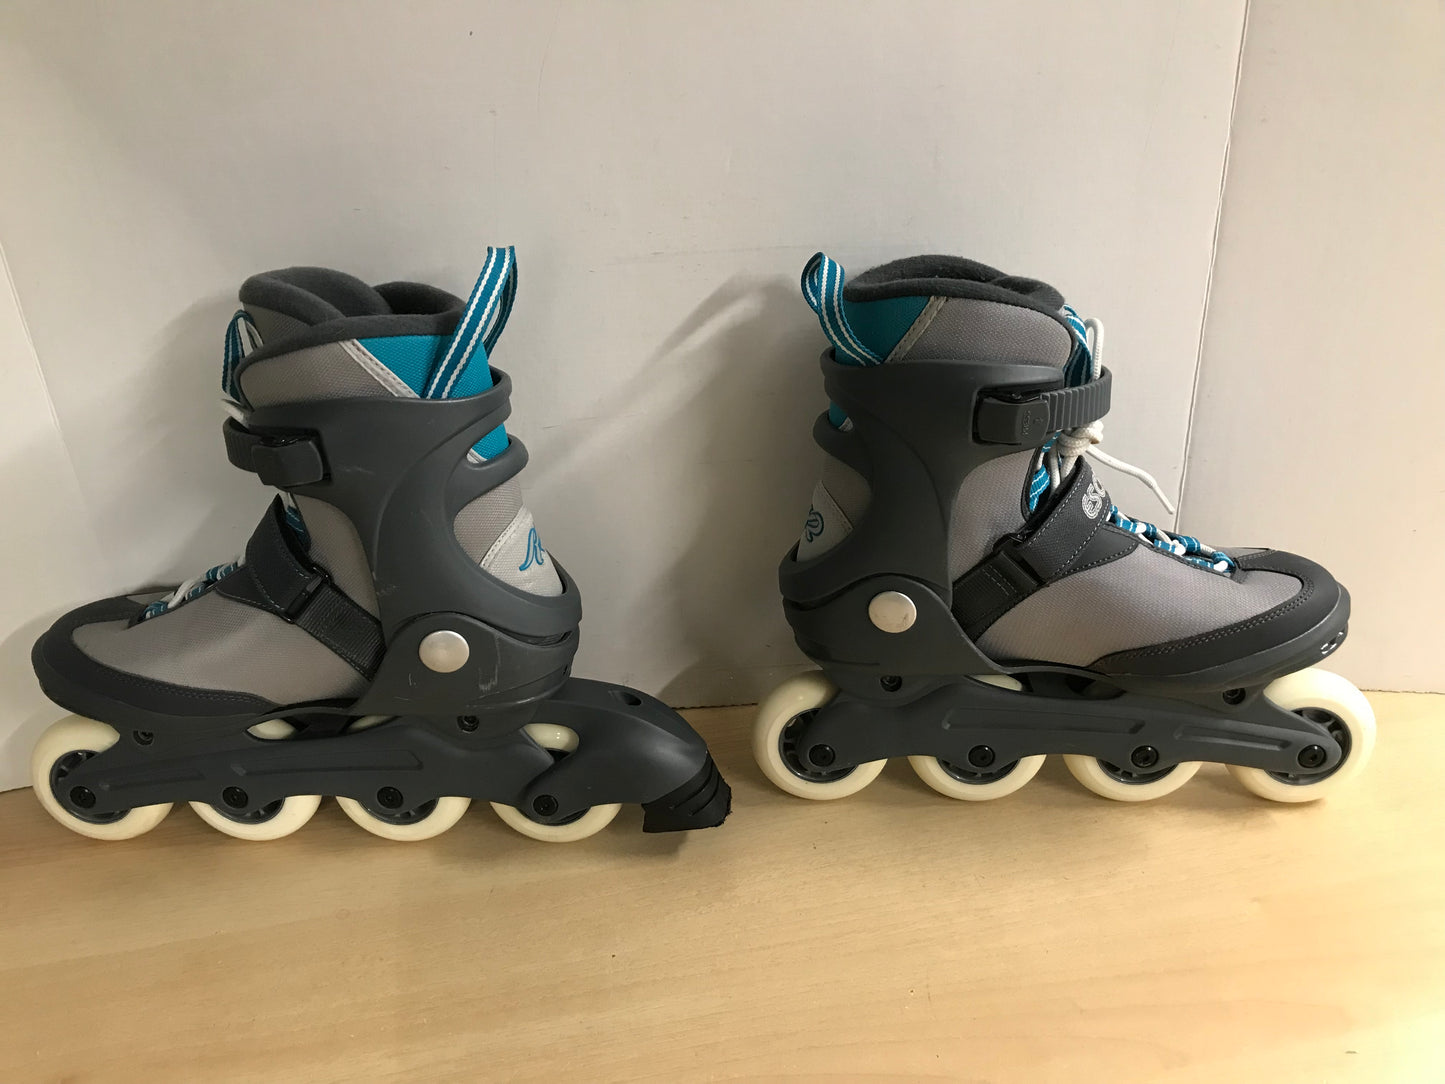 Inline Roller Skates Ladies Size 8 K-2 Grey Teal With Rubber Wheels As New Excellent